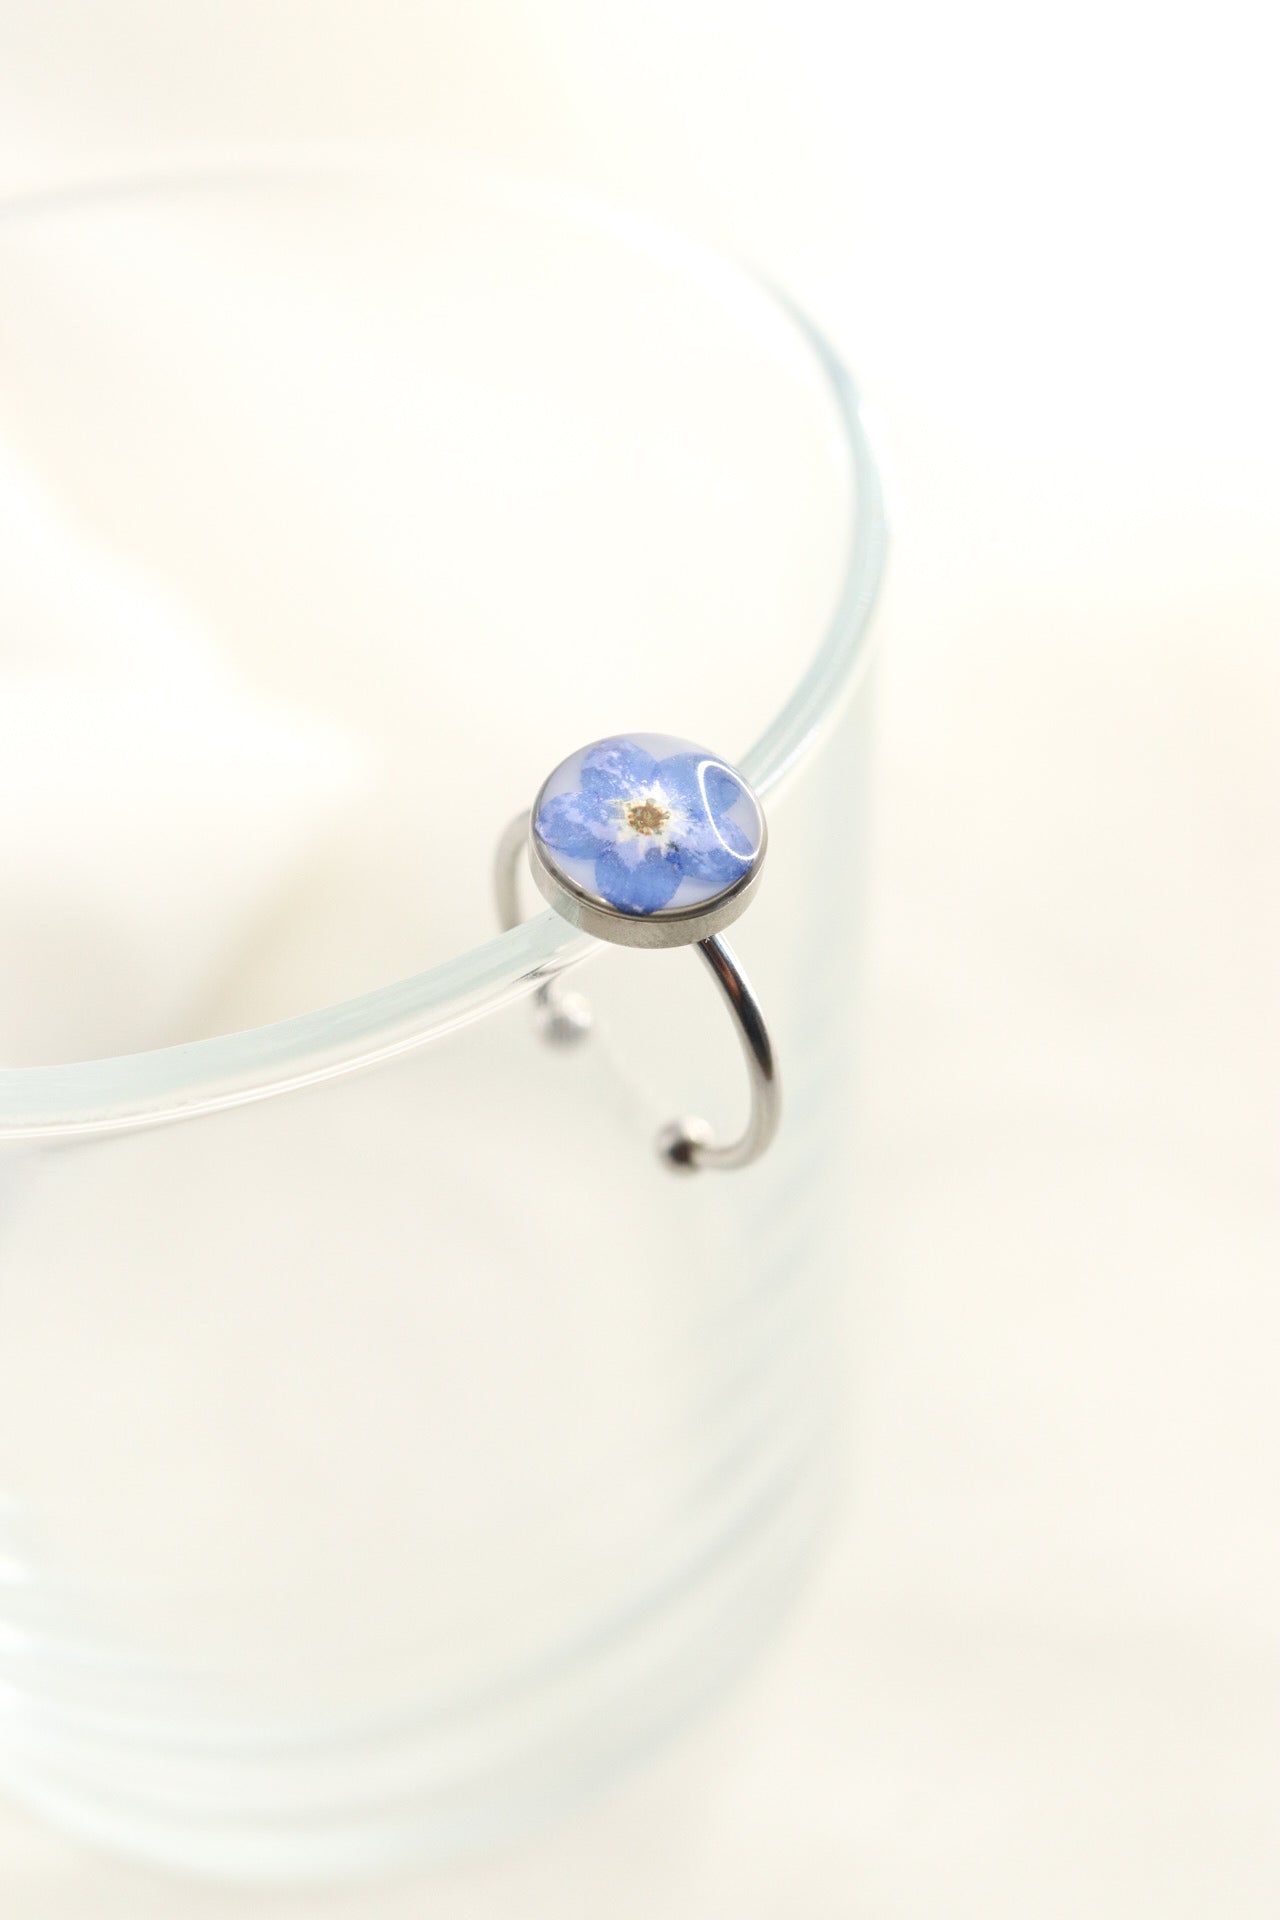 Forget Me Not Wildflower Resin Ring, Adjustable Blue Pressed Flower Silver Ring, Blue Blossom Botanical Ring Christmas Gift For Her Copy   Draft